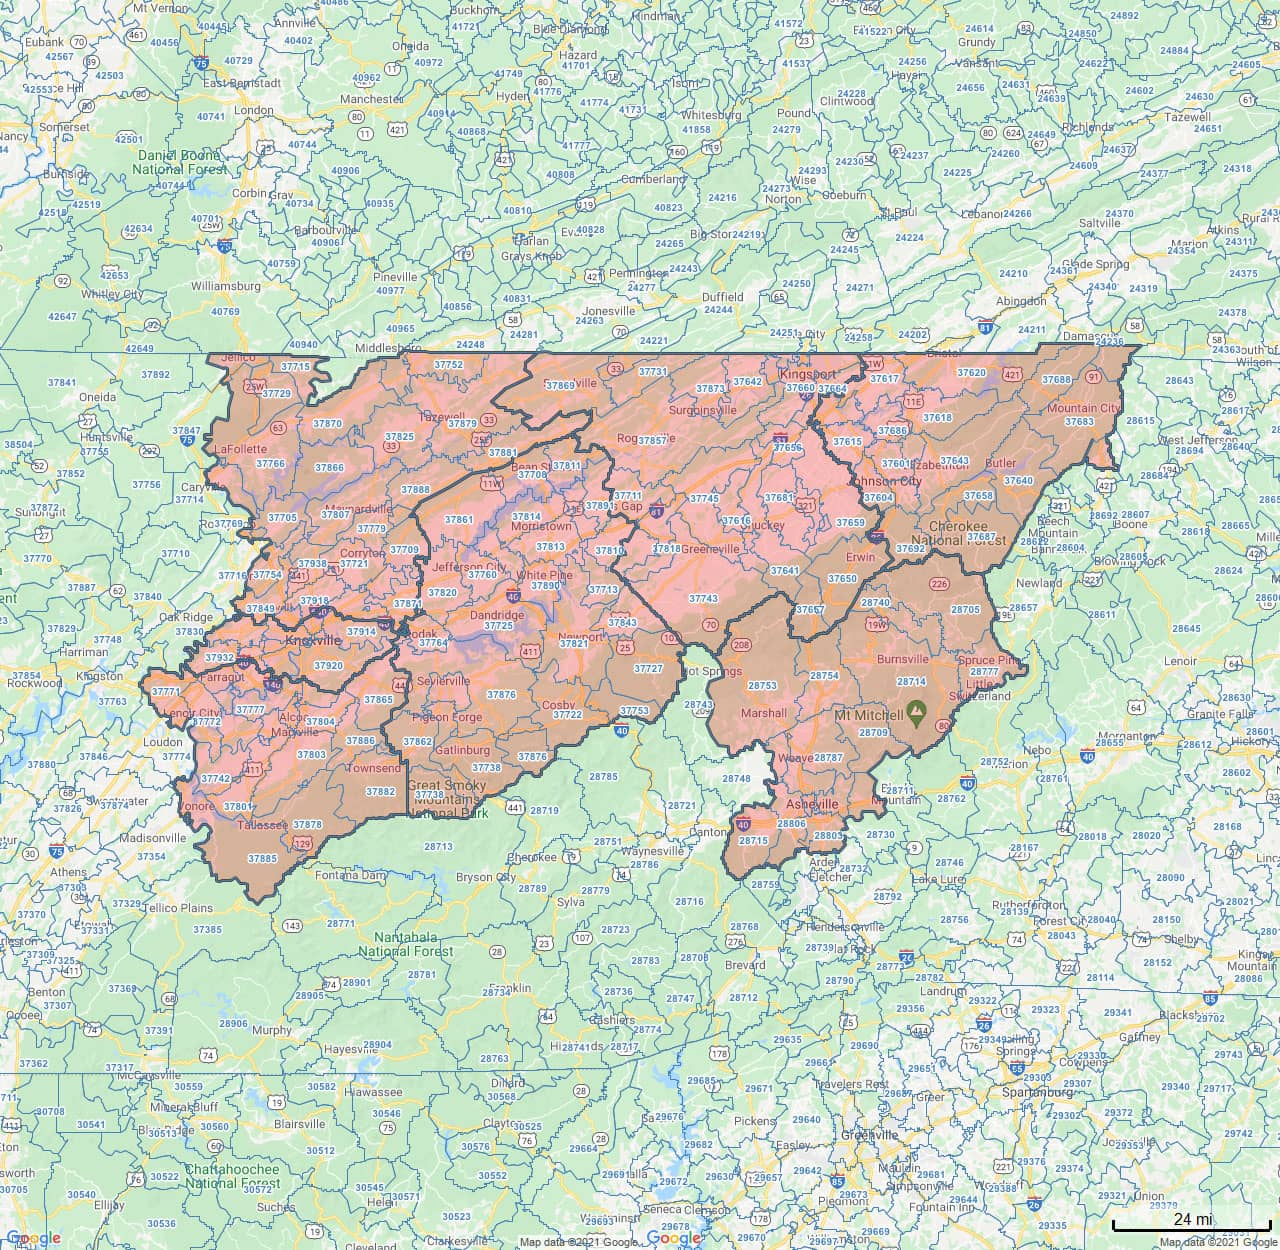 All Dry Services Area Coverage Map for East Tennessee / Southwest Virginia / Asheville, North Carolina